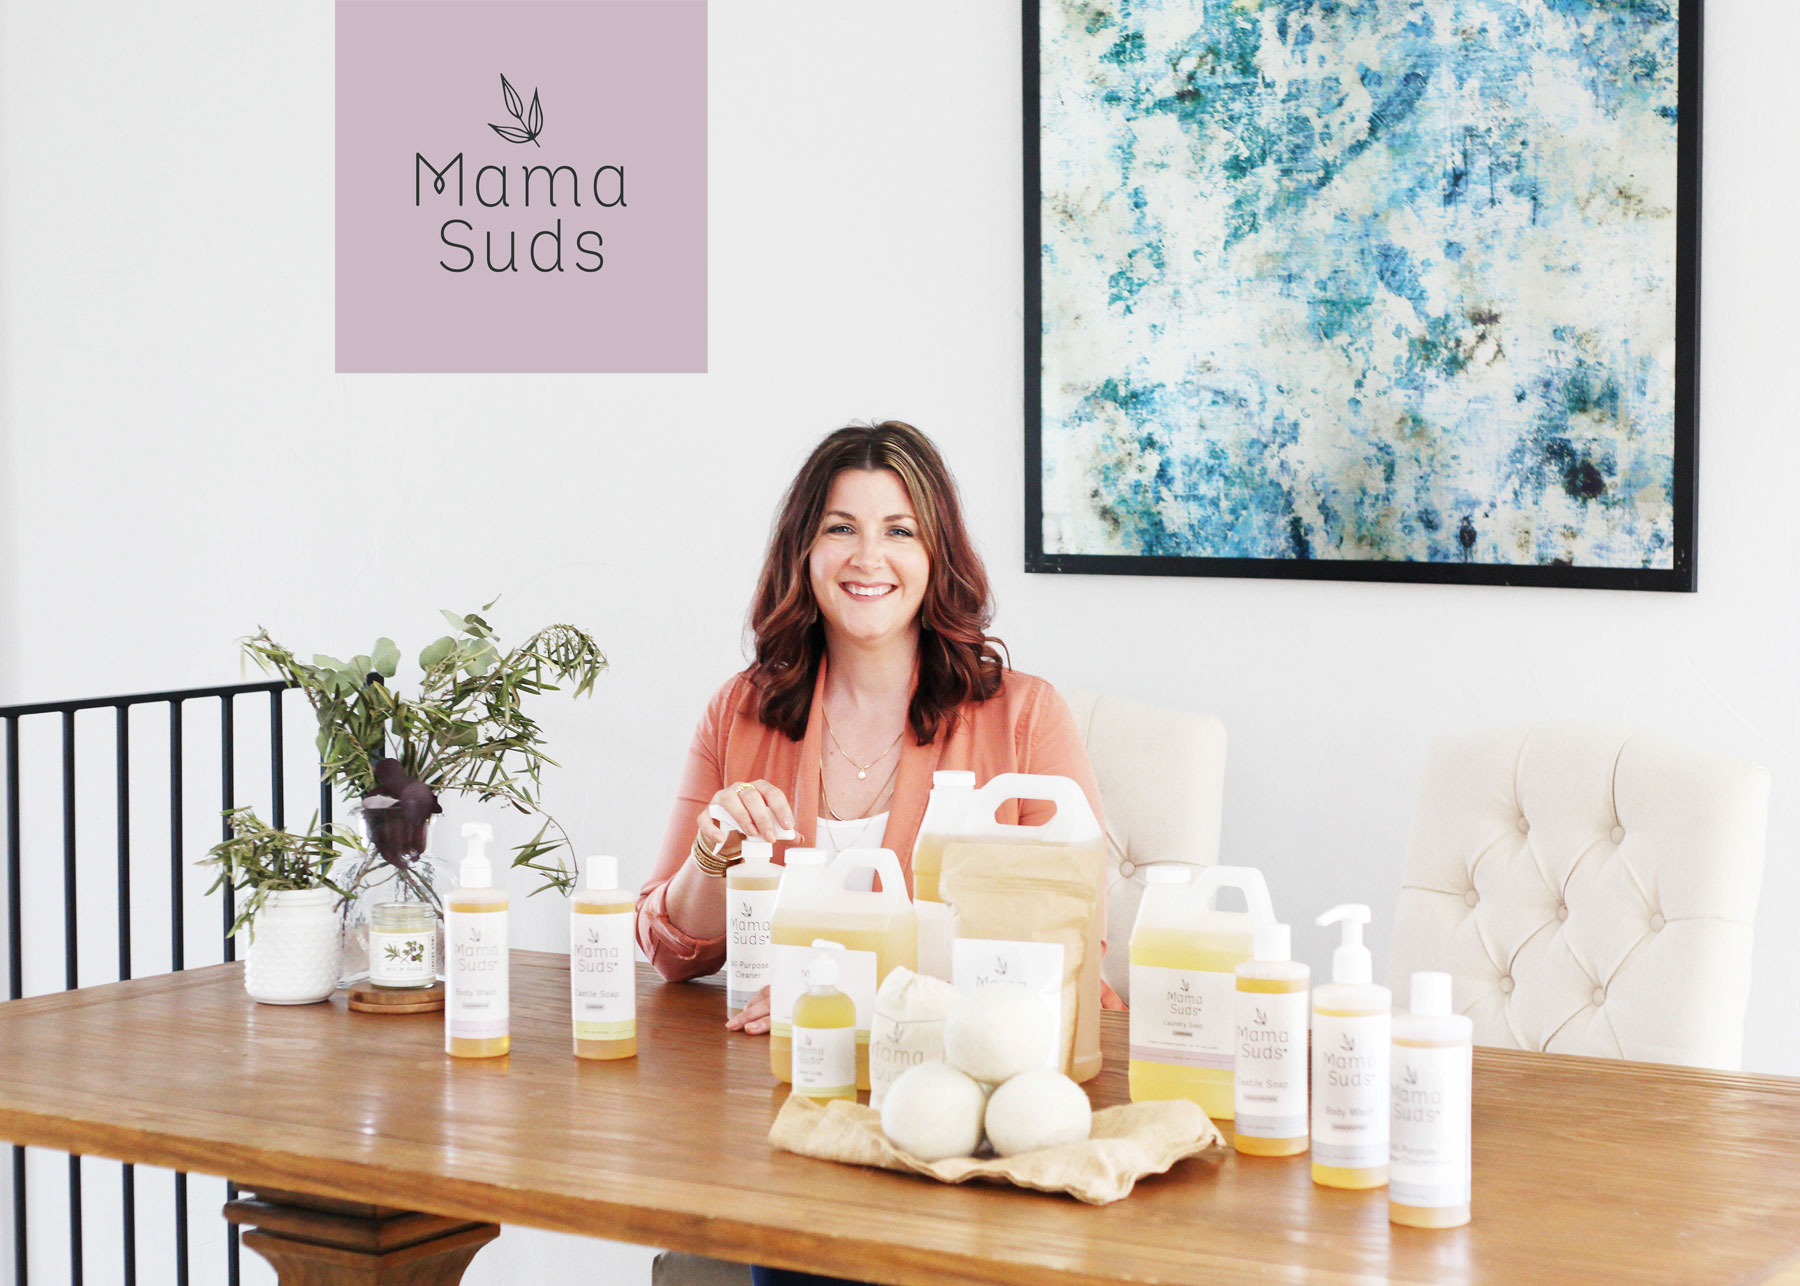 Behind the Suds: How MamaSuds Simplified Subscribe and Save